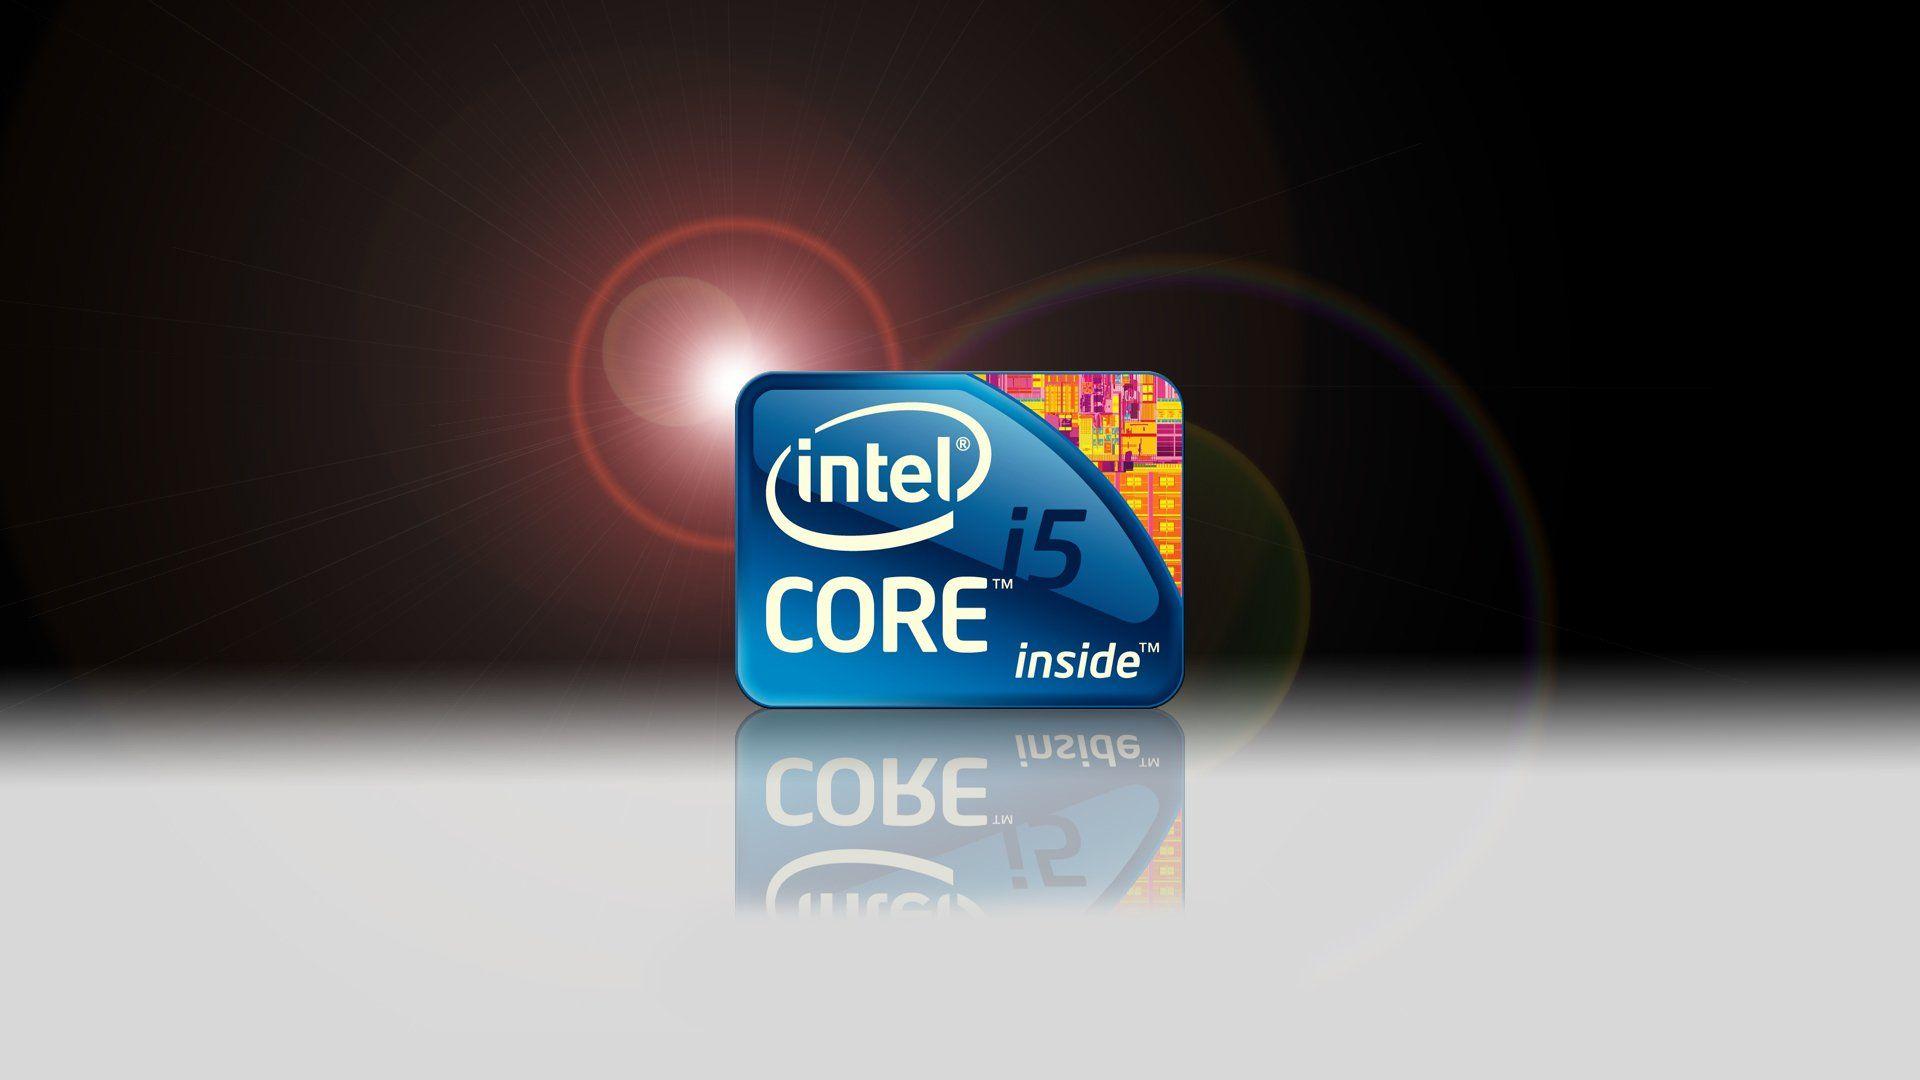 Intel releases worlds fastest gaming CPU but its limited edition   PCGamesN